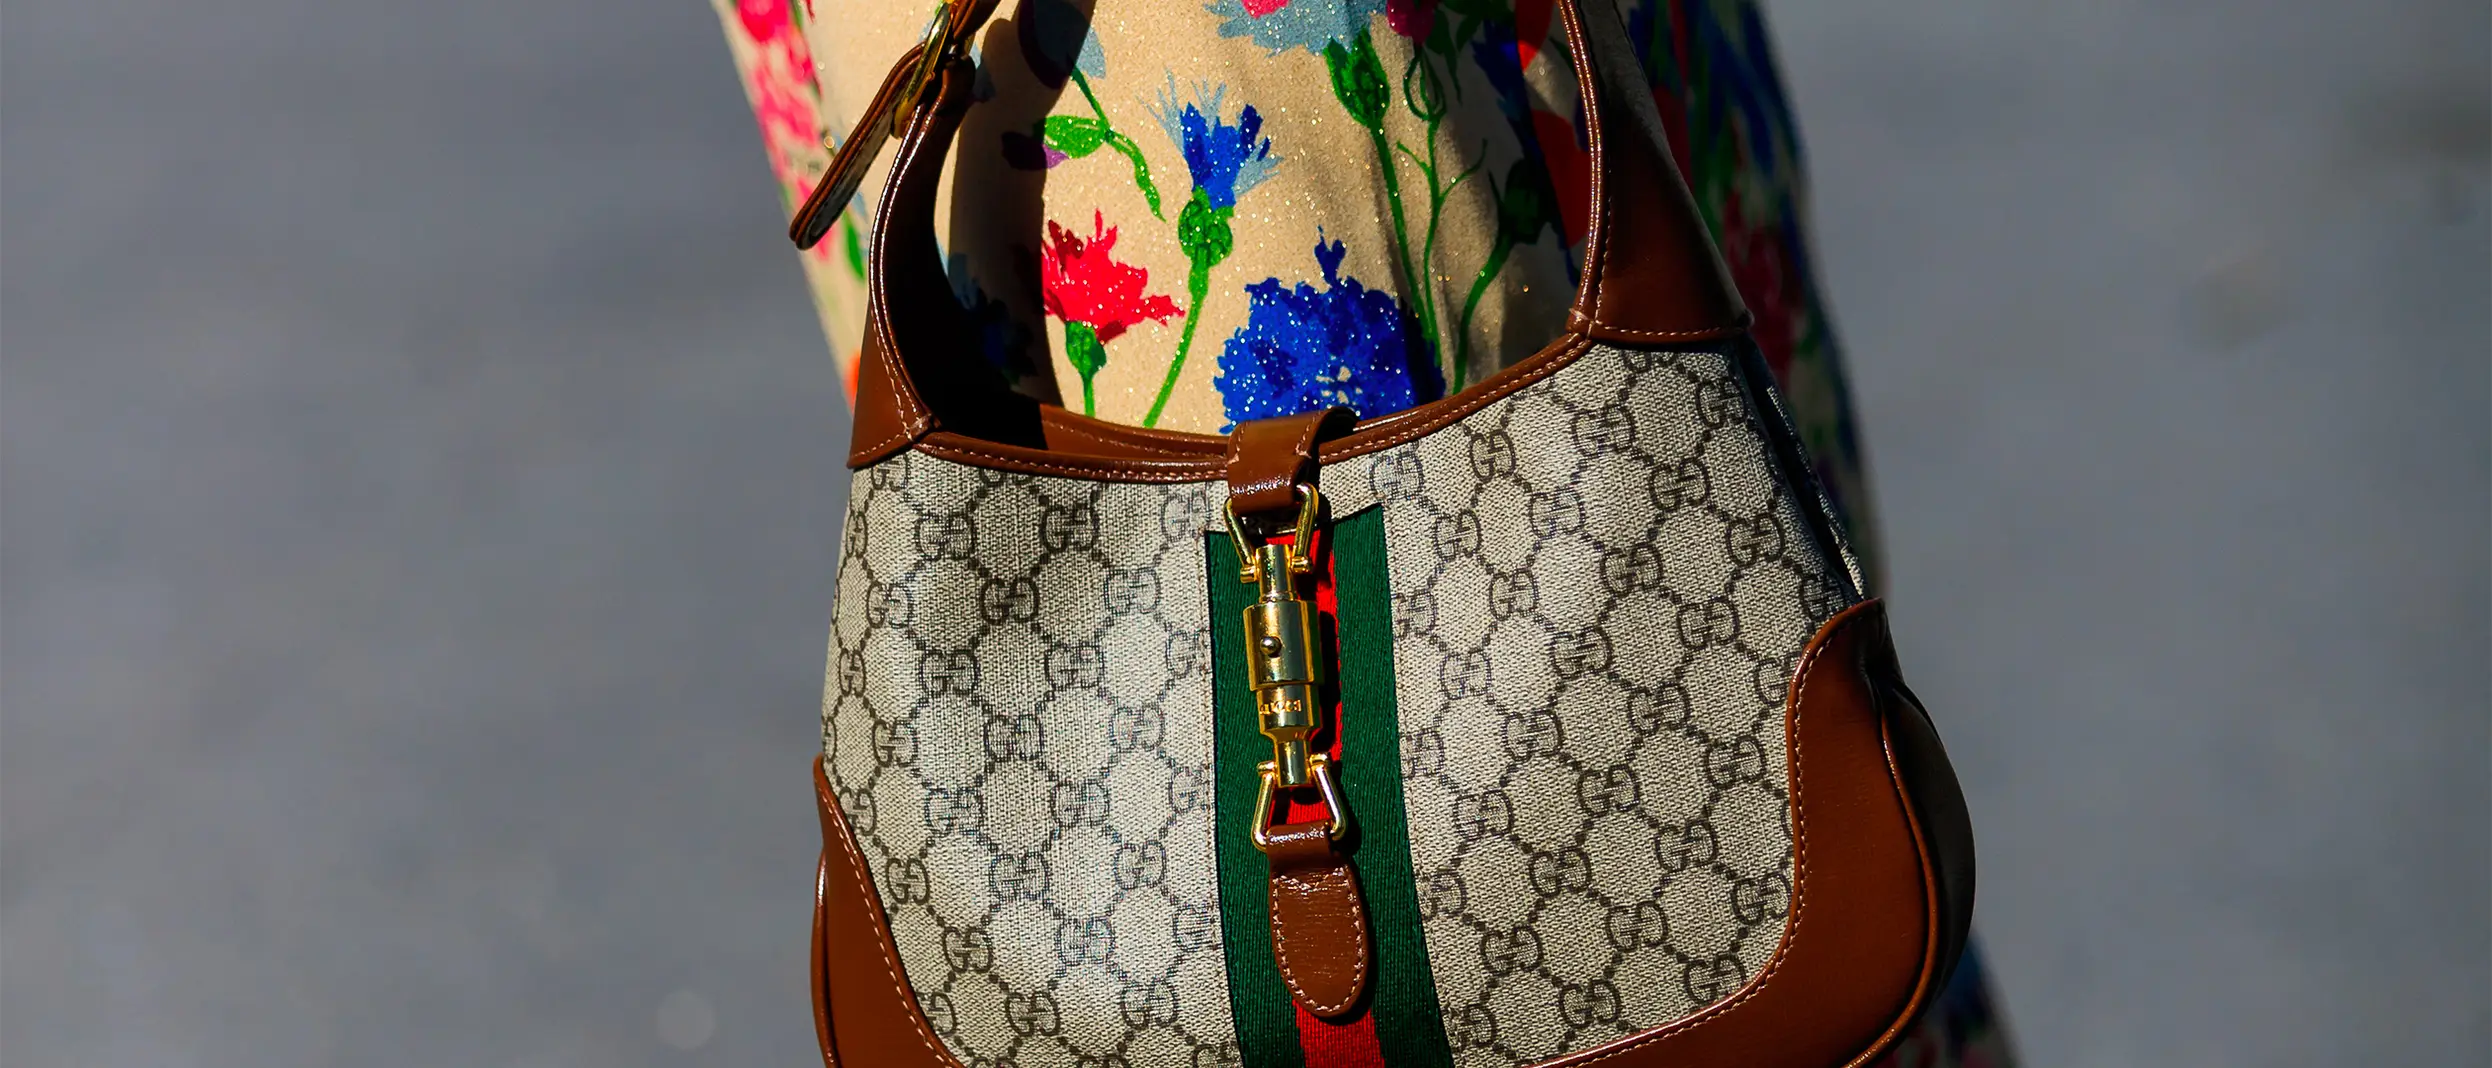 woman-in-profile-with-gucci-bag.jpg